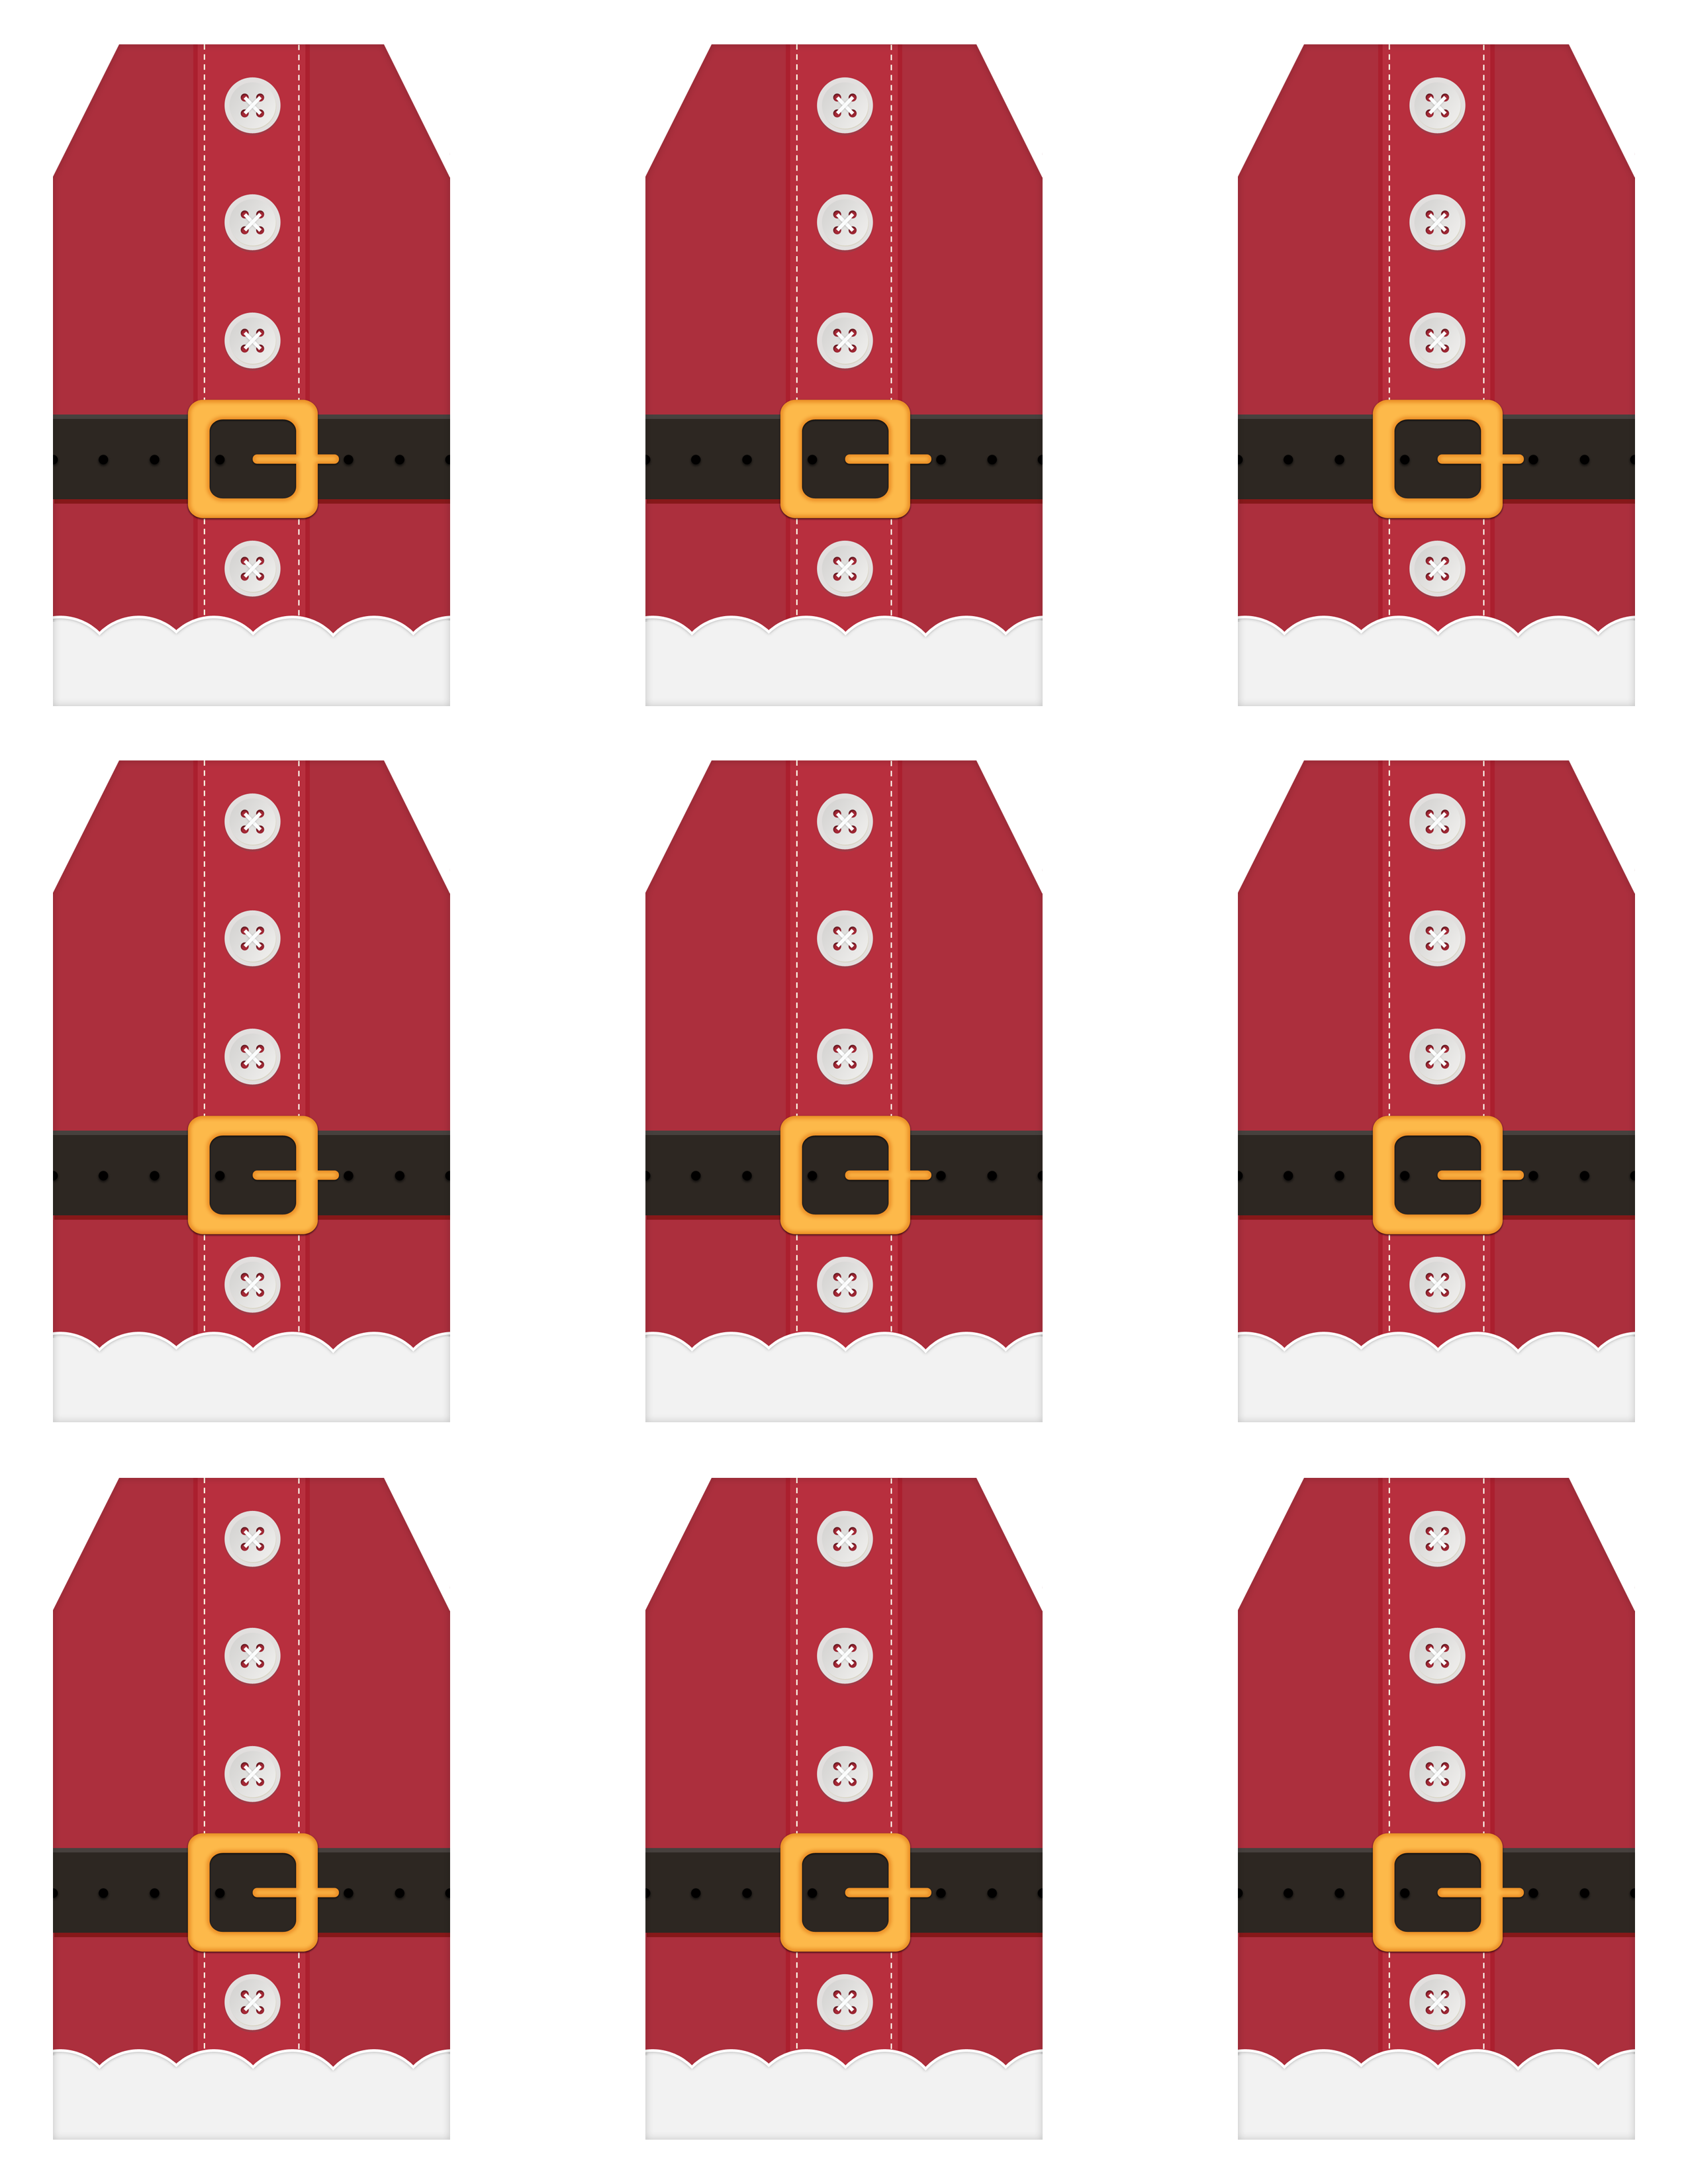 Free Printable Santa Suit Holiday Gift Tagsa Gift to you from The